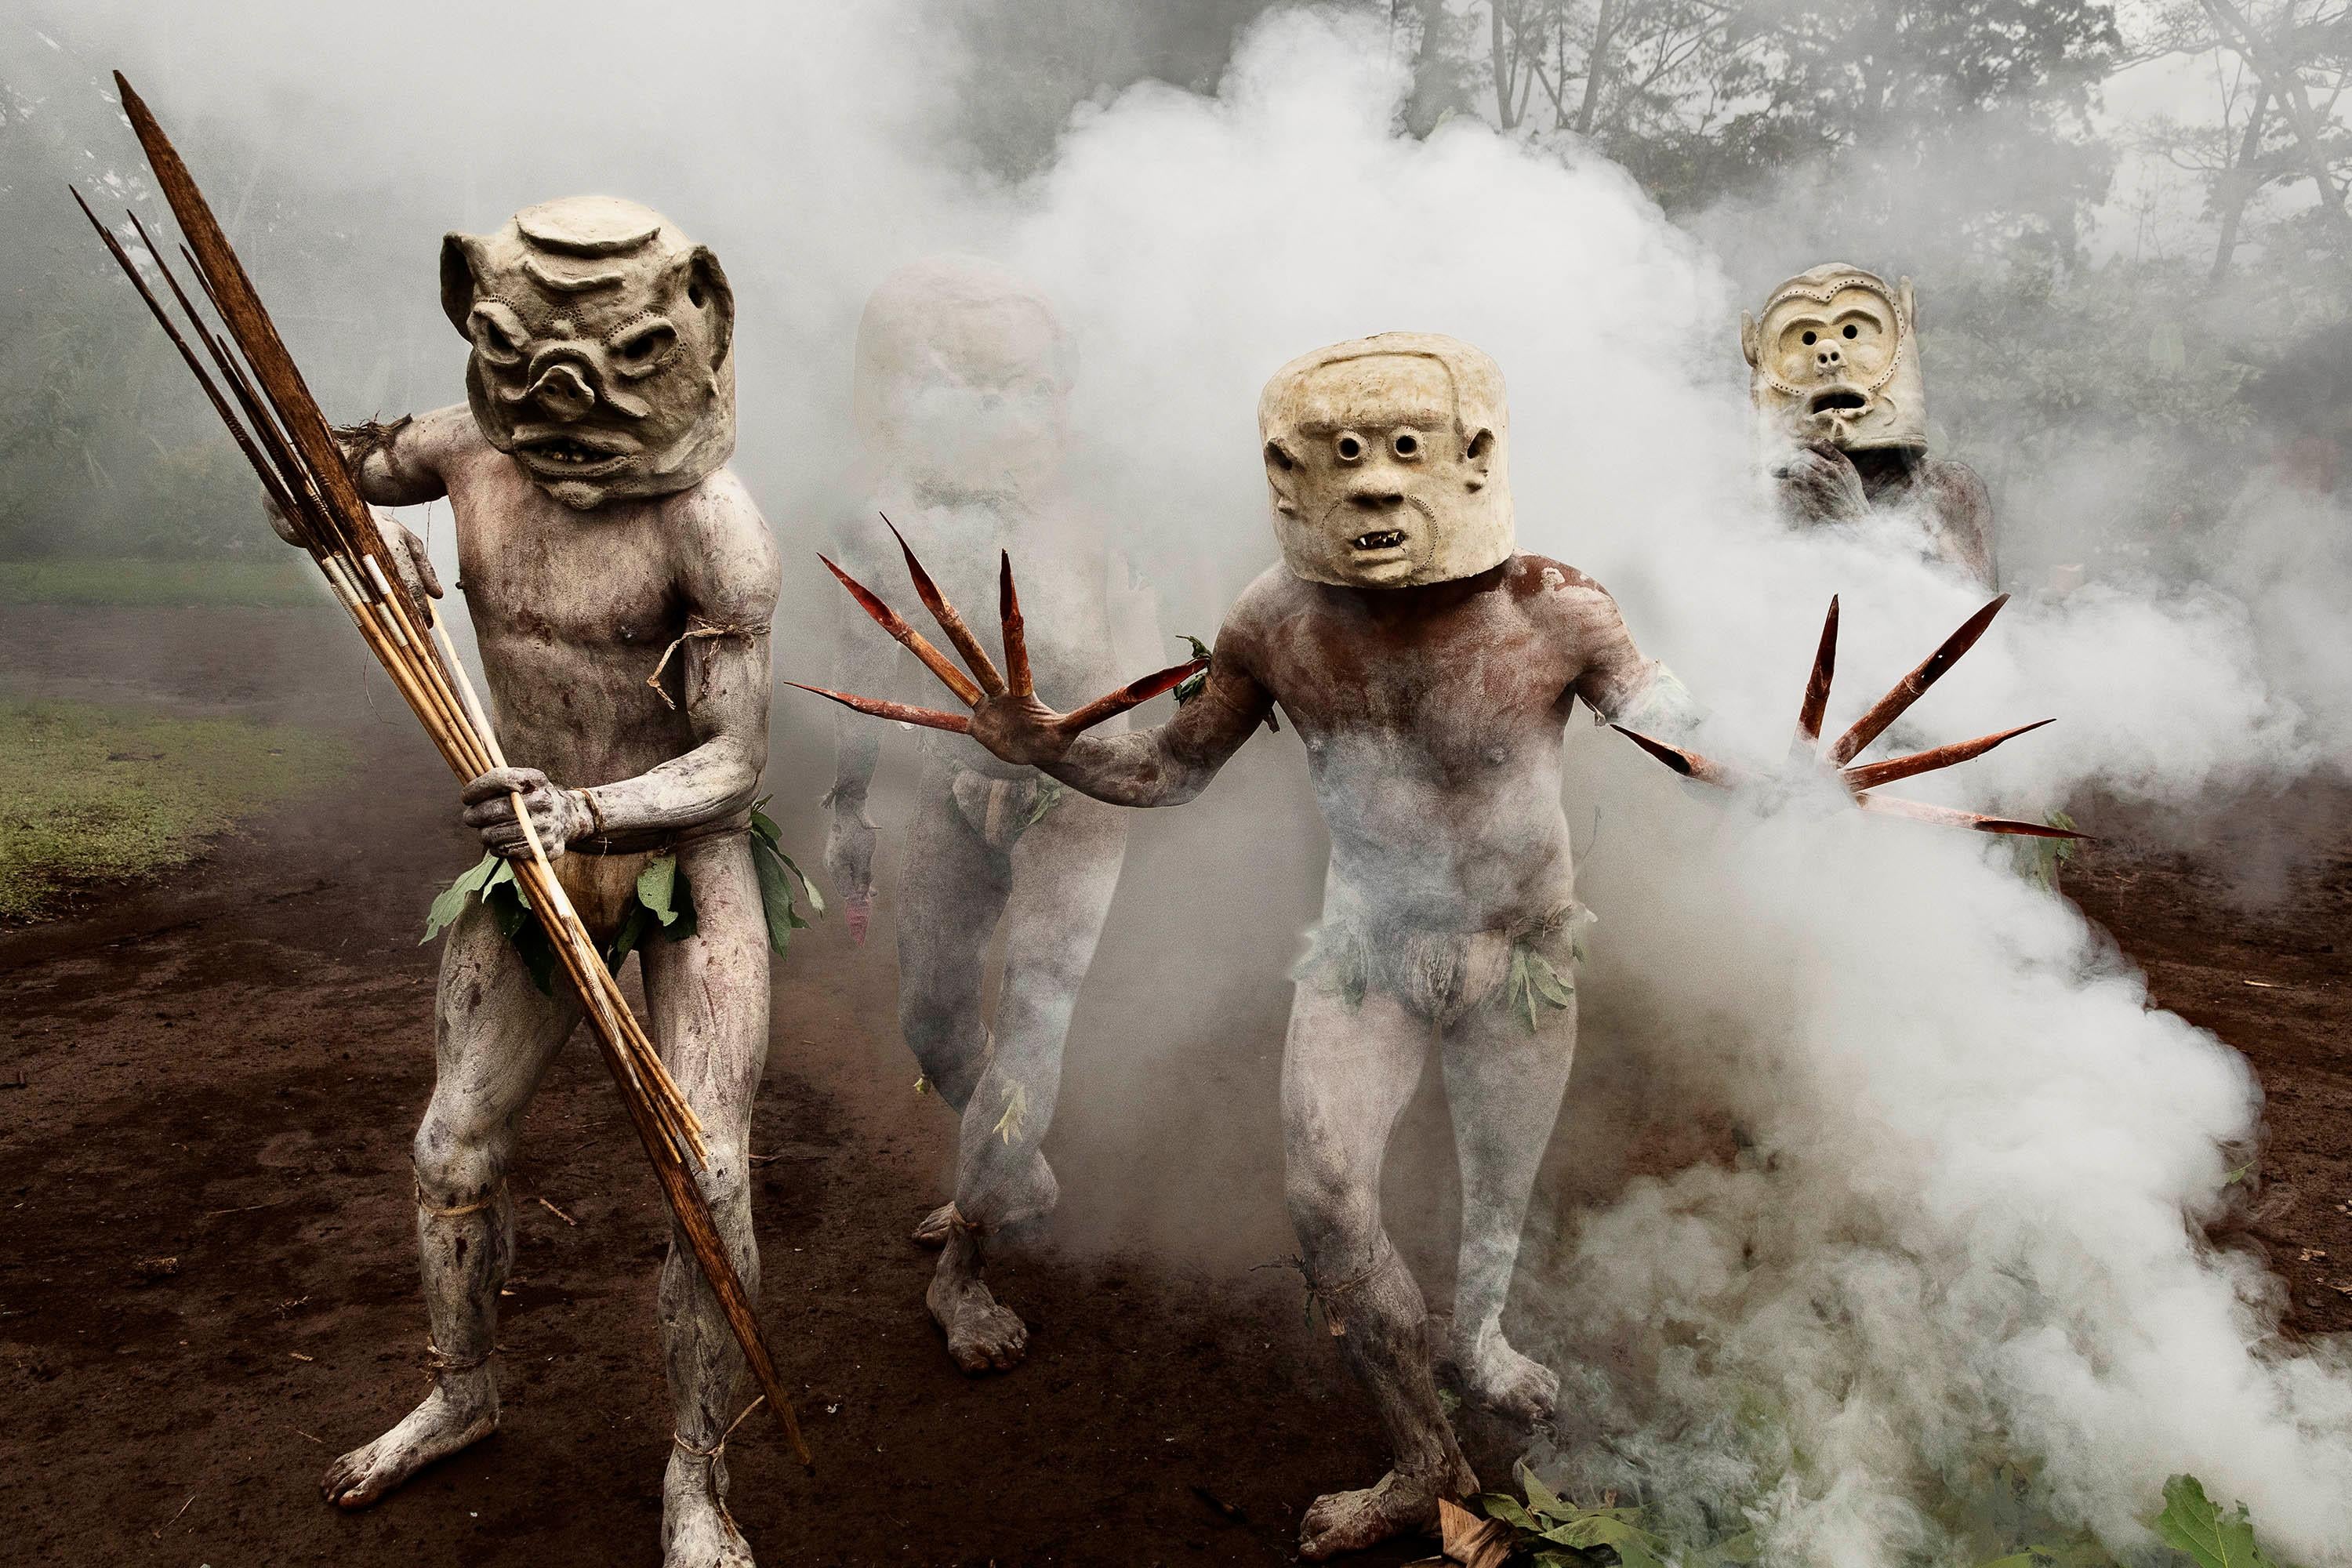 Tribesmen with Clay Masks and Bamboo Garb, Papua New Guinea